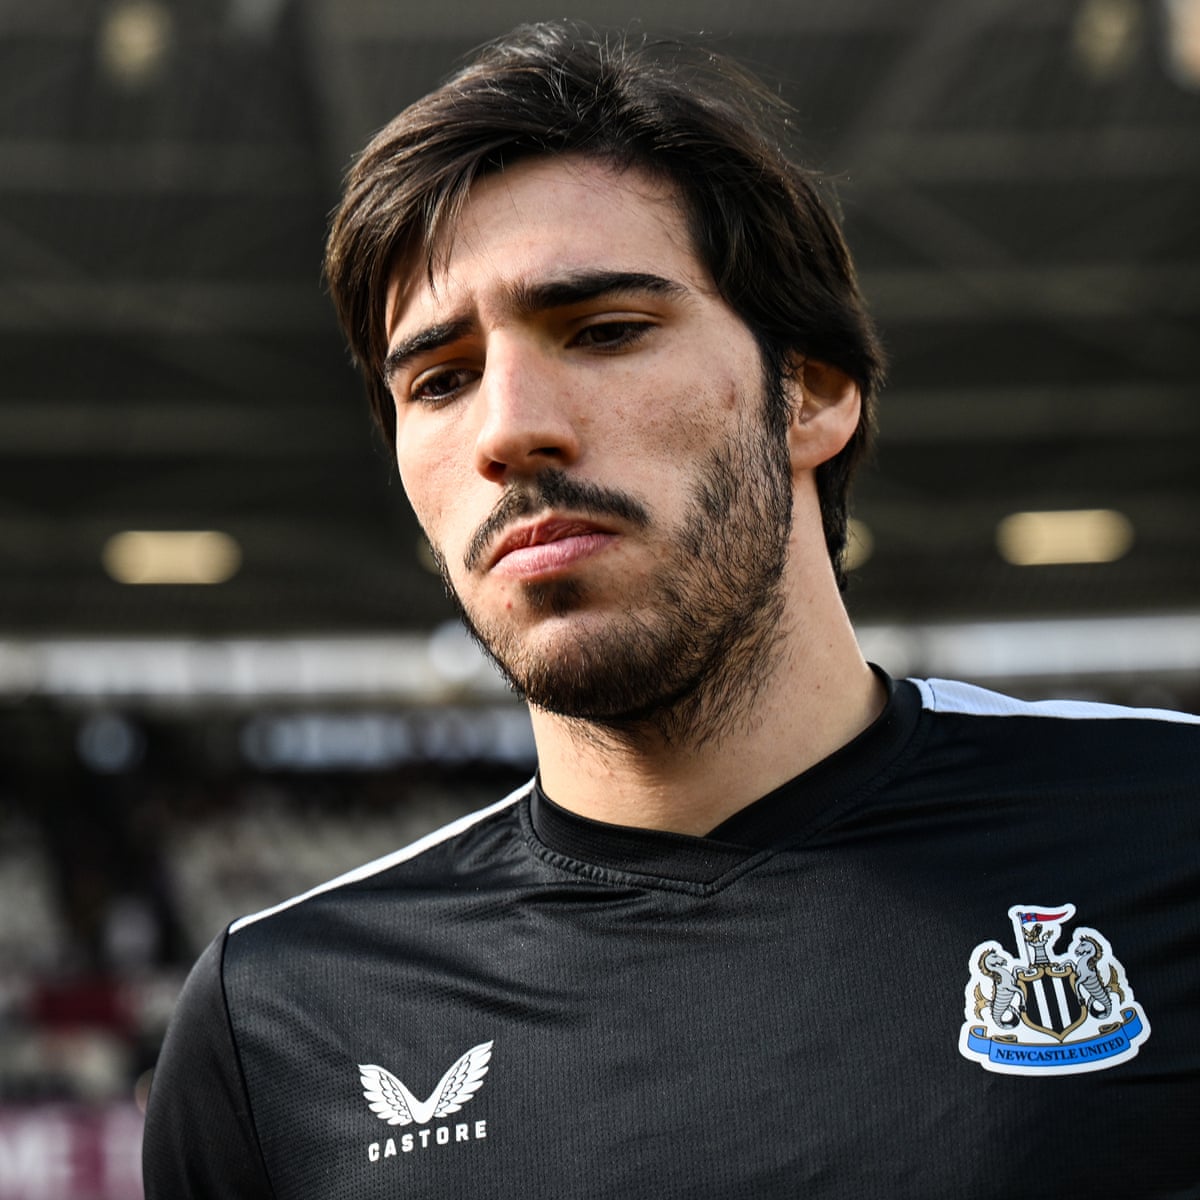 Newcastle stunned by reports Tonali has admitted to betting on Milan games  | Newcastle United | The Guardian